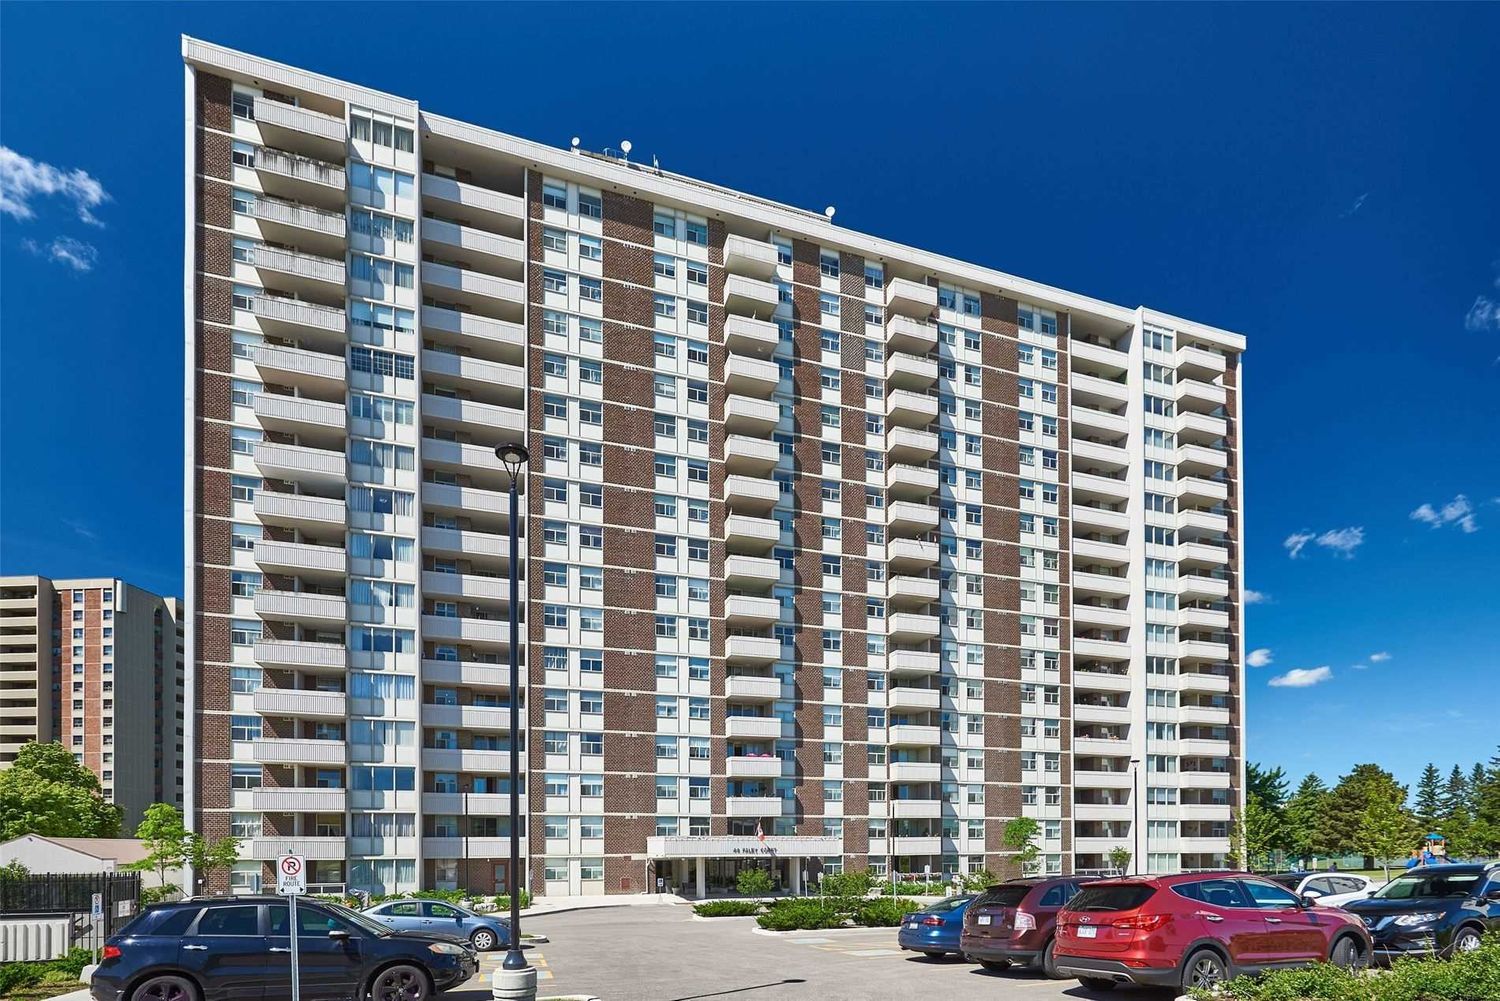 44 Falby Court. 44 Falby Court Condos is located in  Ajax, Toronto - image #1 of 2